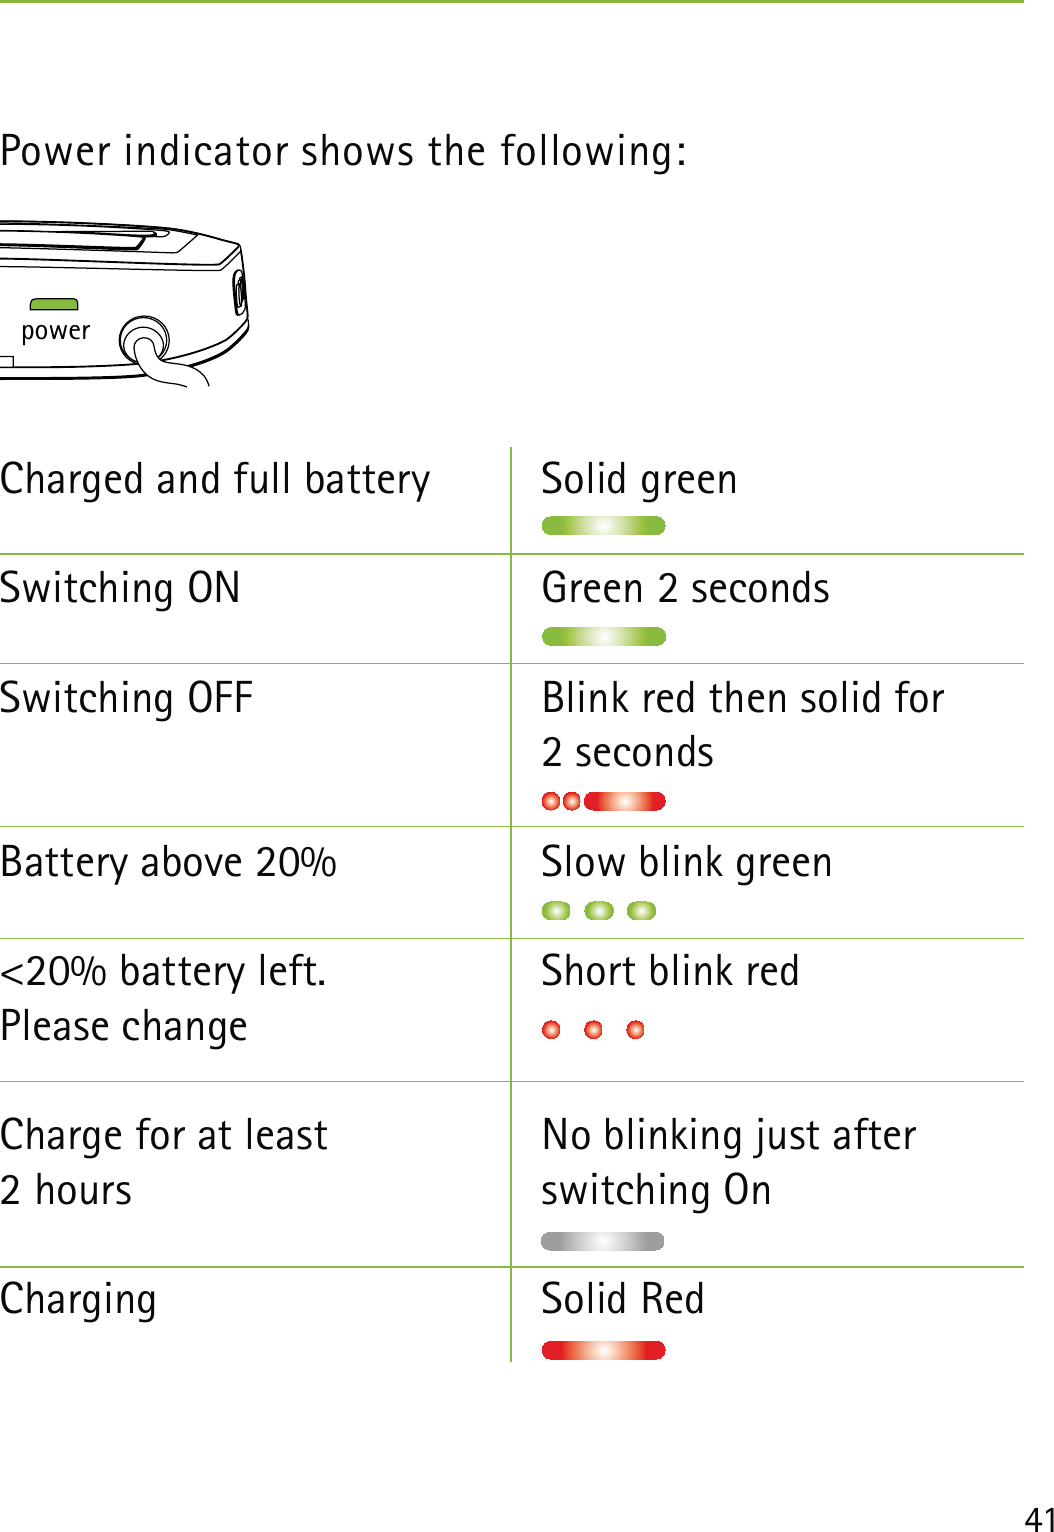 41Power indicator shows the following: Charged and full battery  Solid greenSwitching ON  Green 2 secondsSwitching OFF  Blink red then solid for   2 secondsBattery above 20%  Slow blink green &lt;20% battery left.   Short blink redPlease changeCharge for at least   No blinking just after2 hours  switching OnCharging Solid Redpower